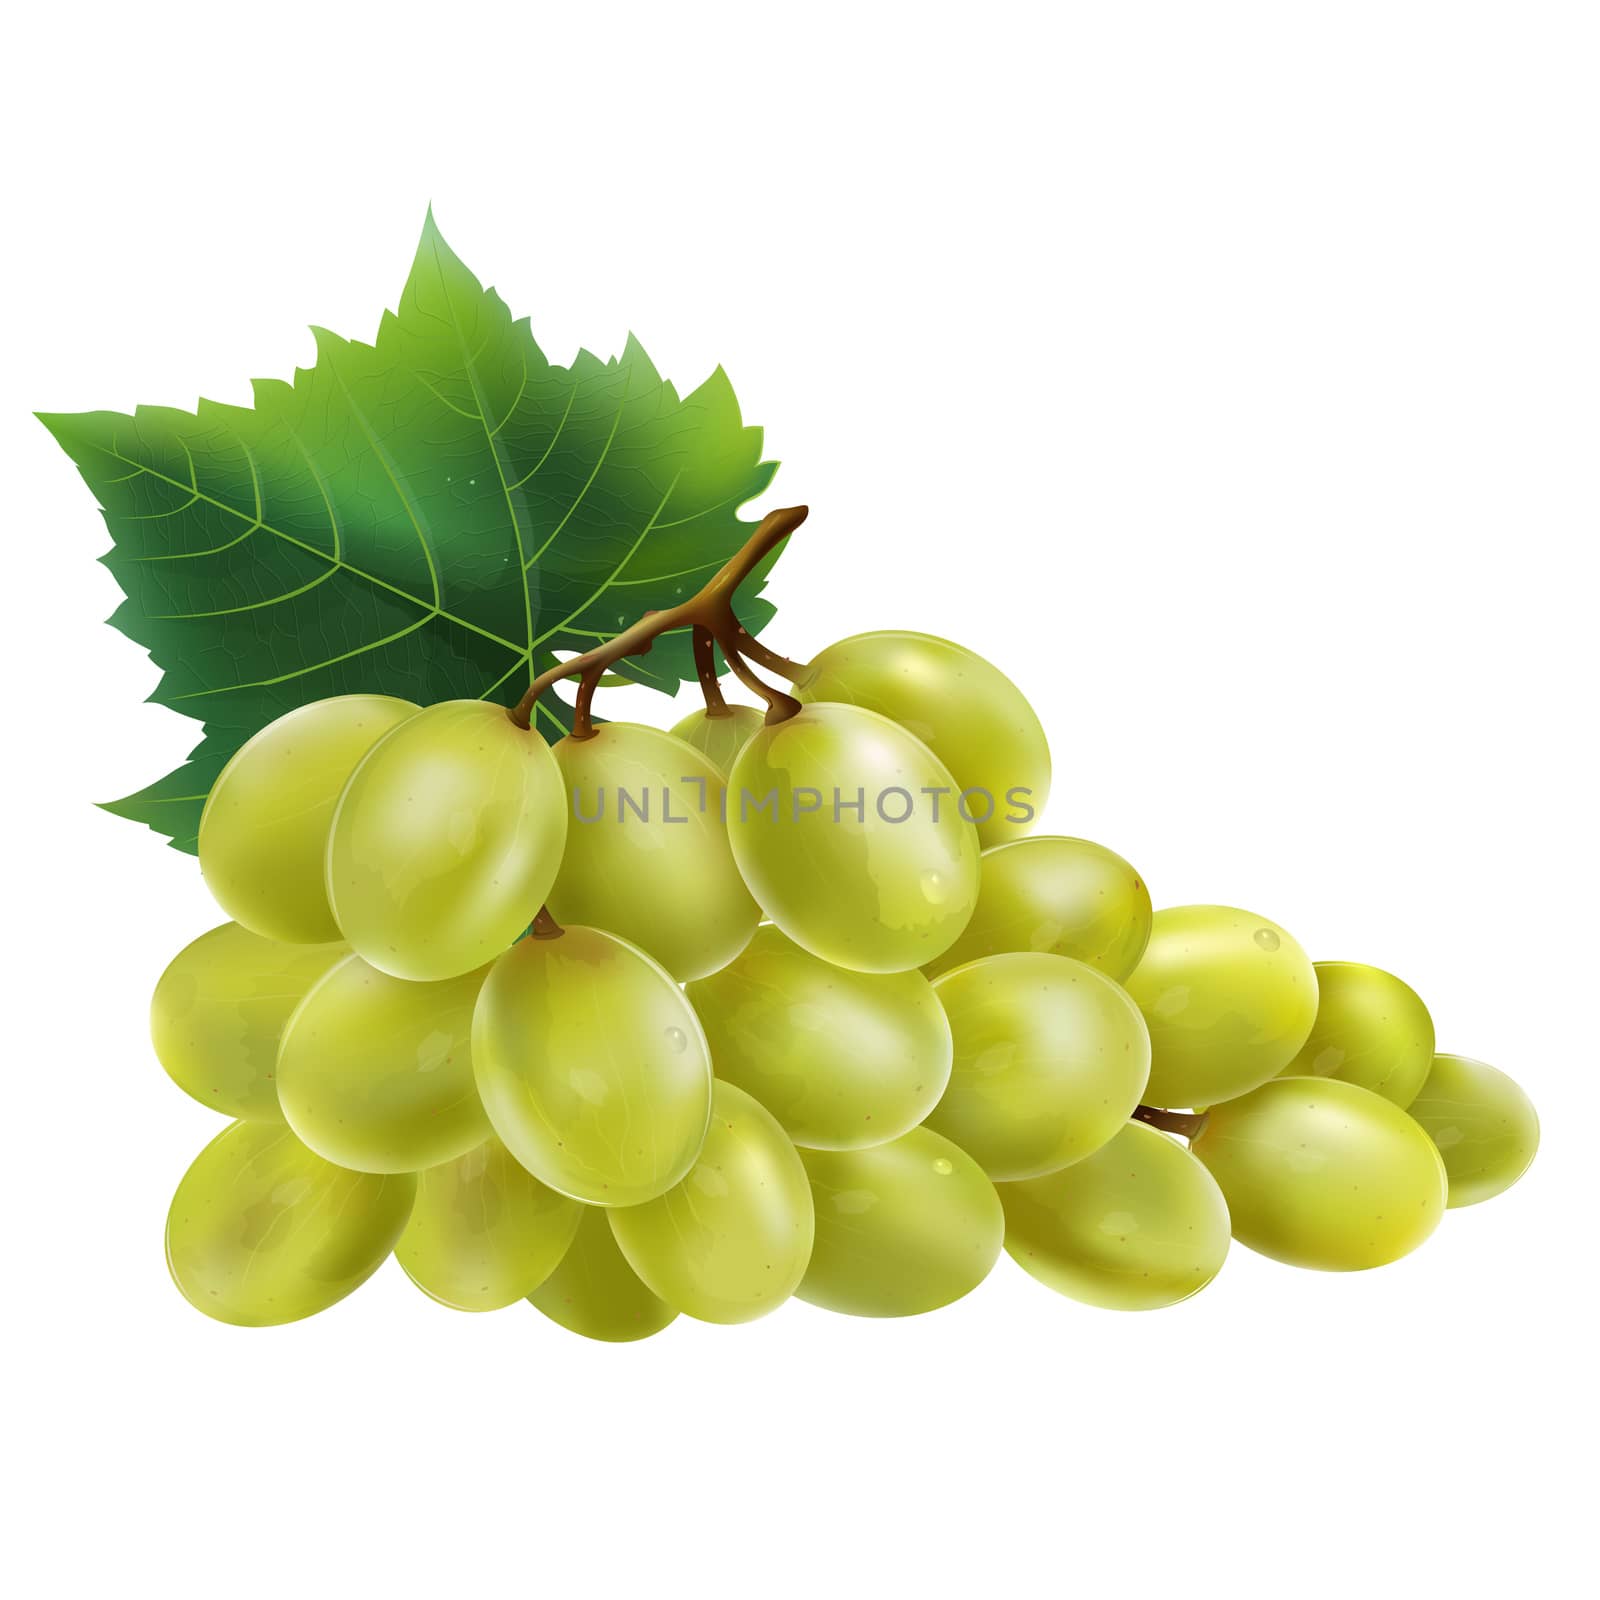 White grapes with leaves. Isolated illustration on white background.